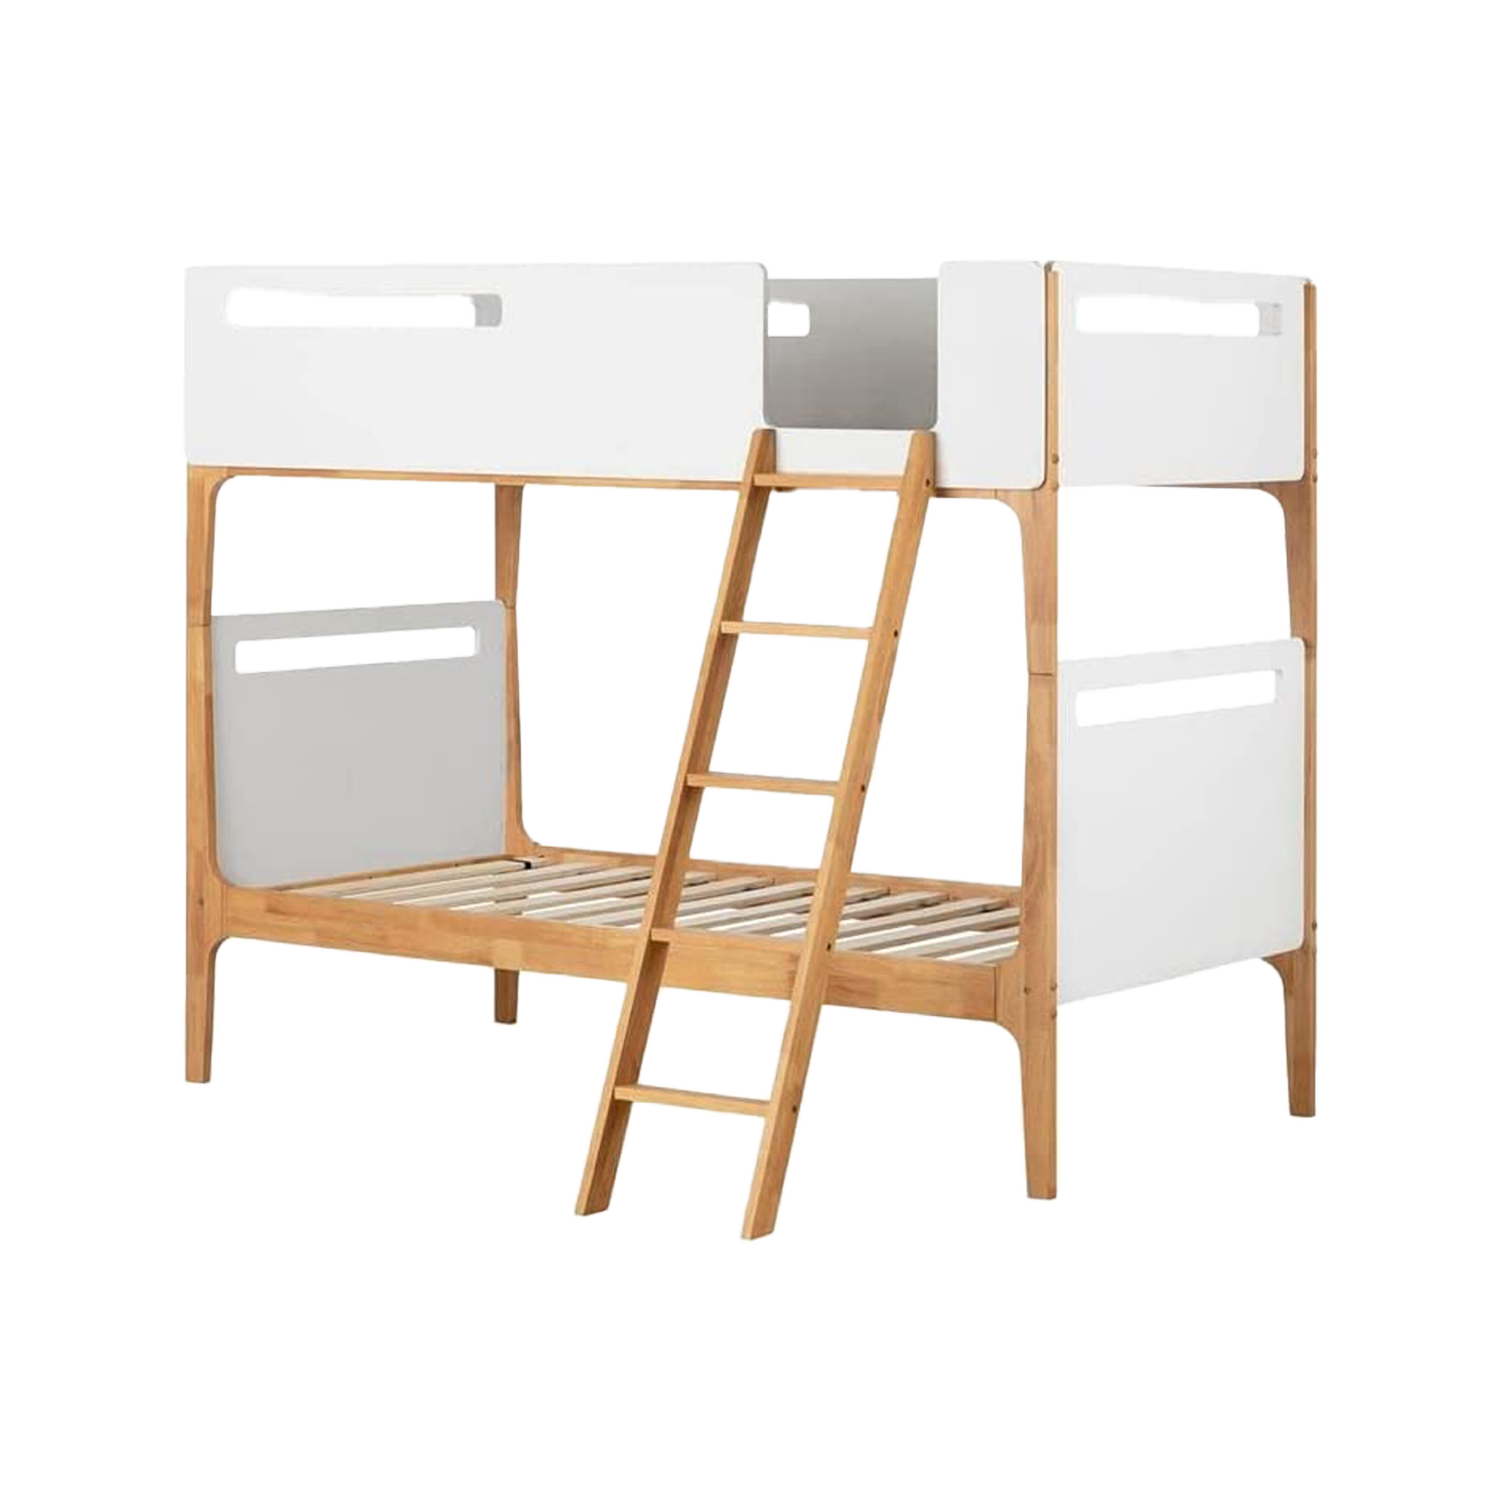 White and Wood Amazon Bunk Bed.